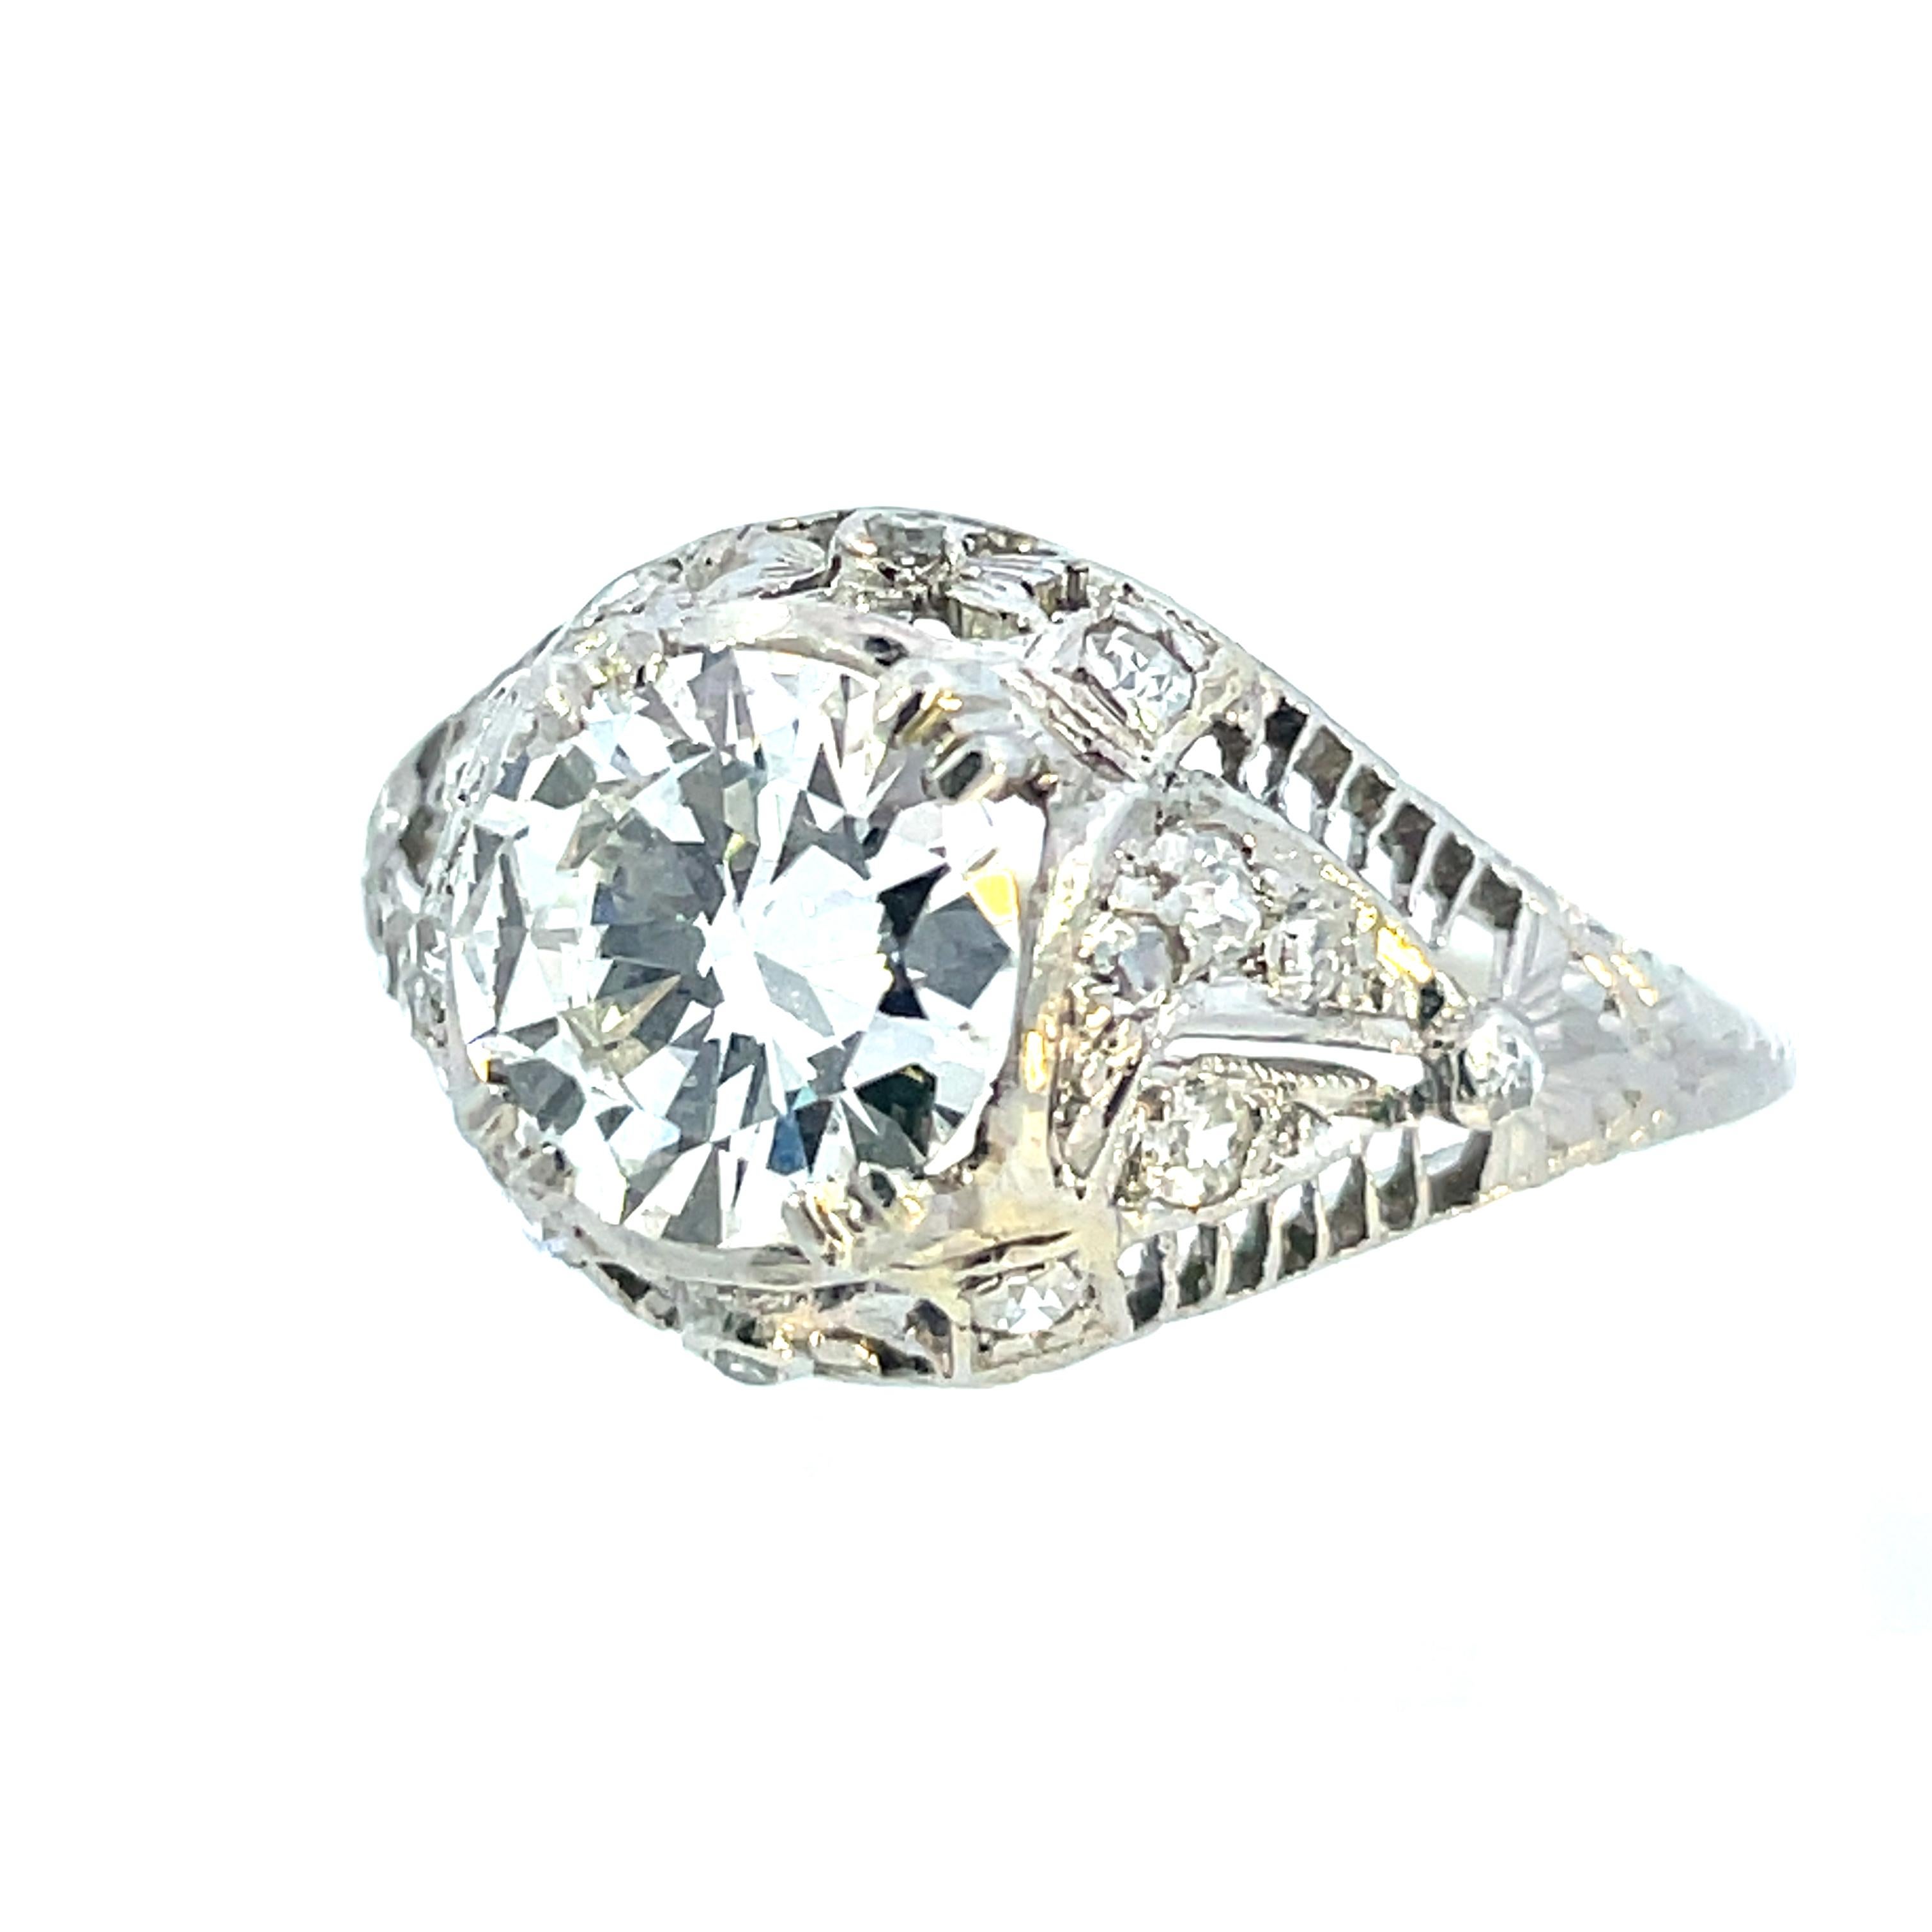 1910 Edwardian Platinum Filigree Ring with Round and European Cut Diamonds  For Sale 1